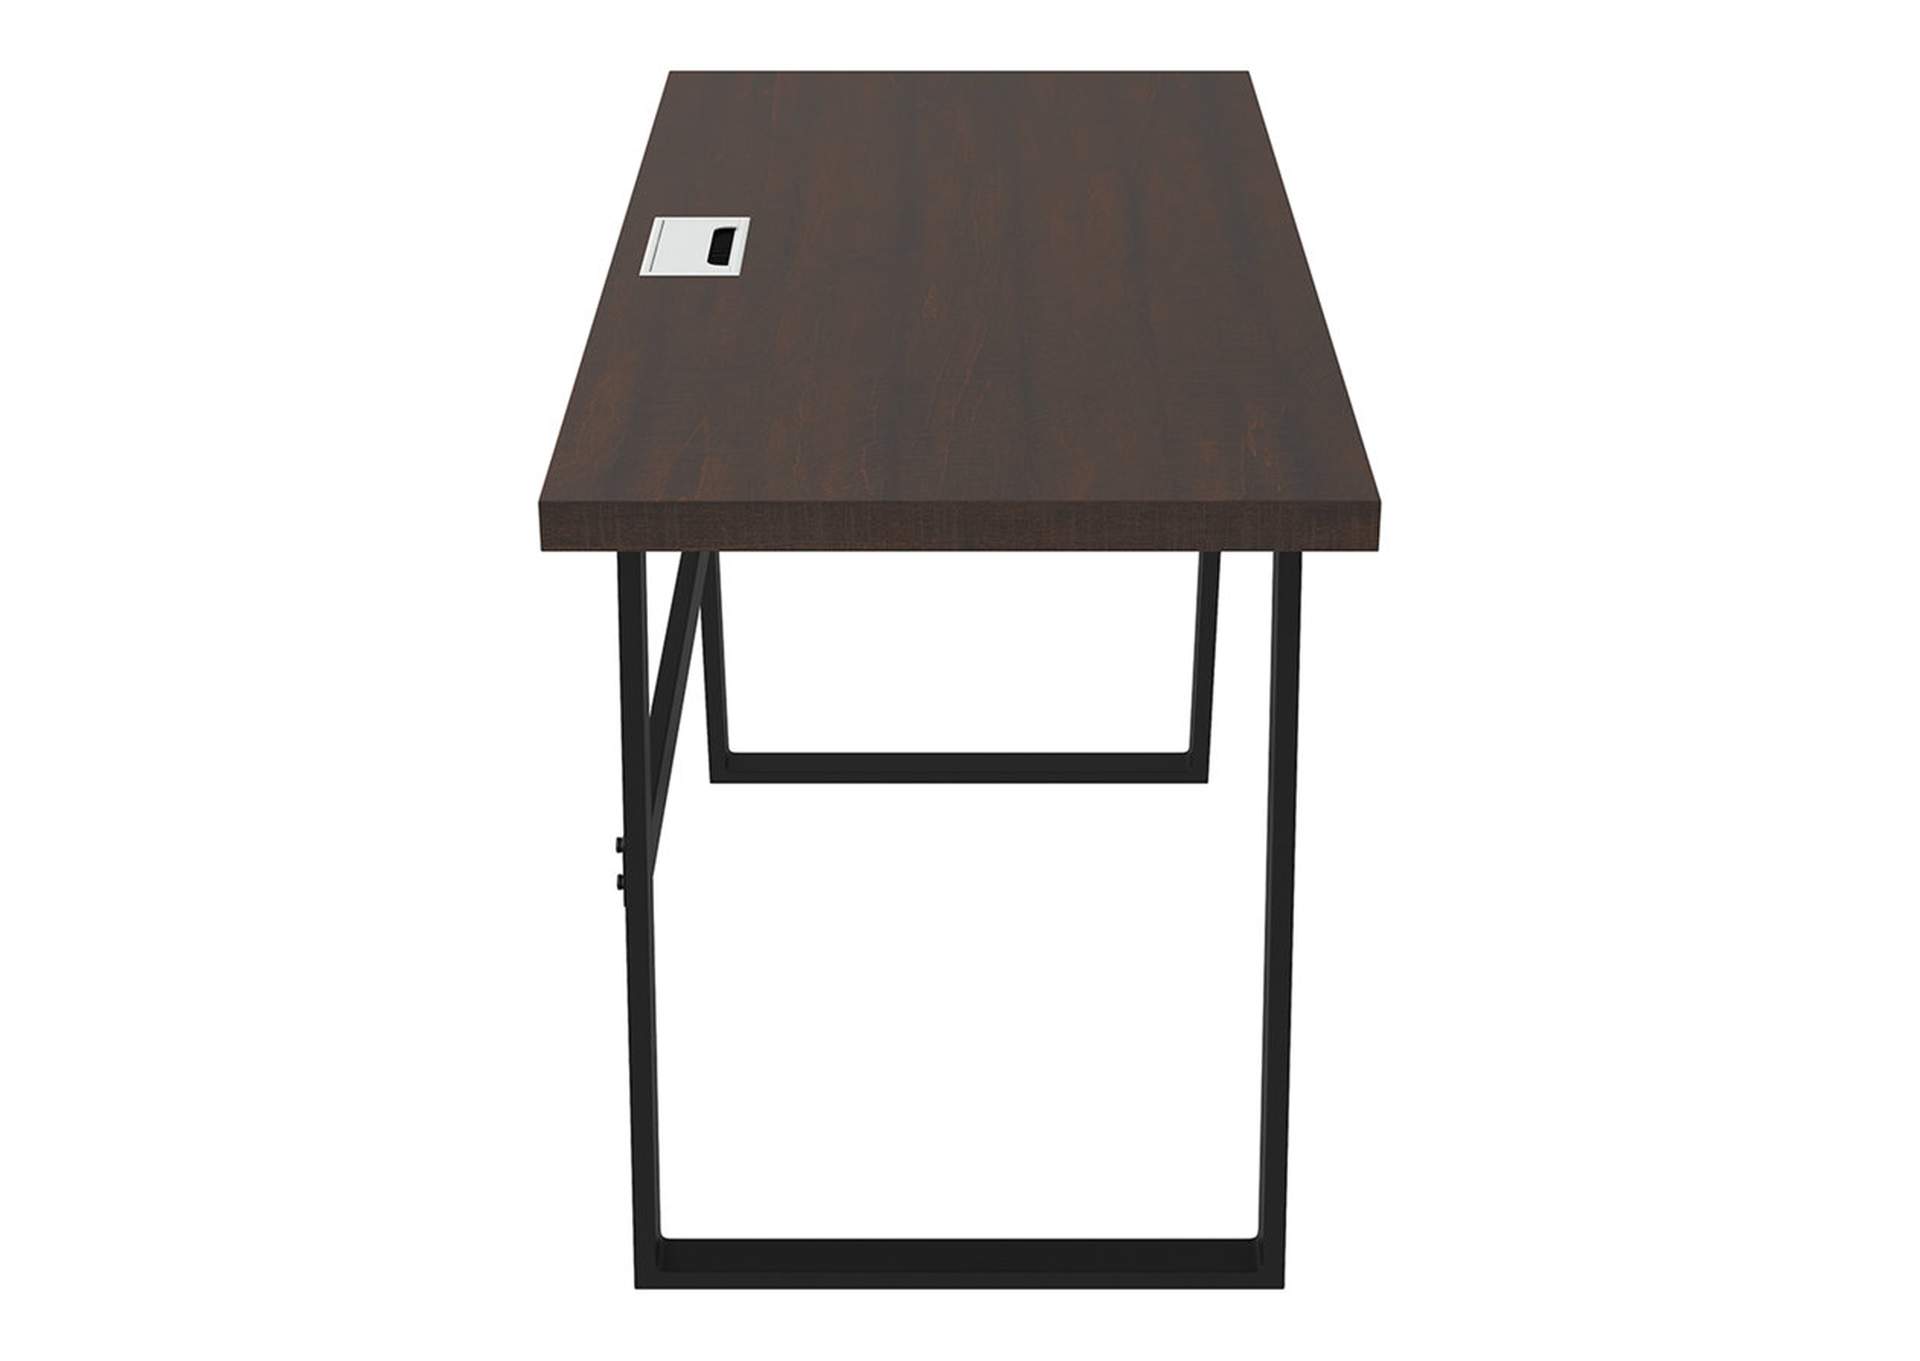 Camiburg 47" Home Office Desk,Direct To Consumer Express